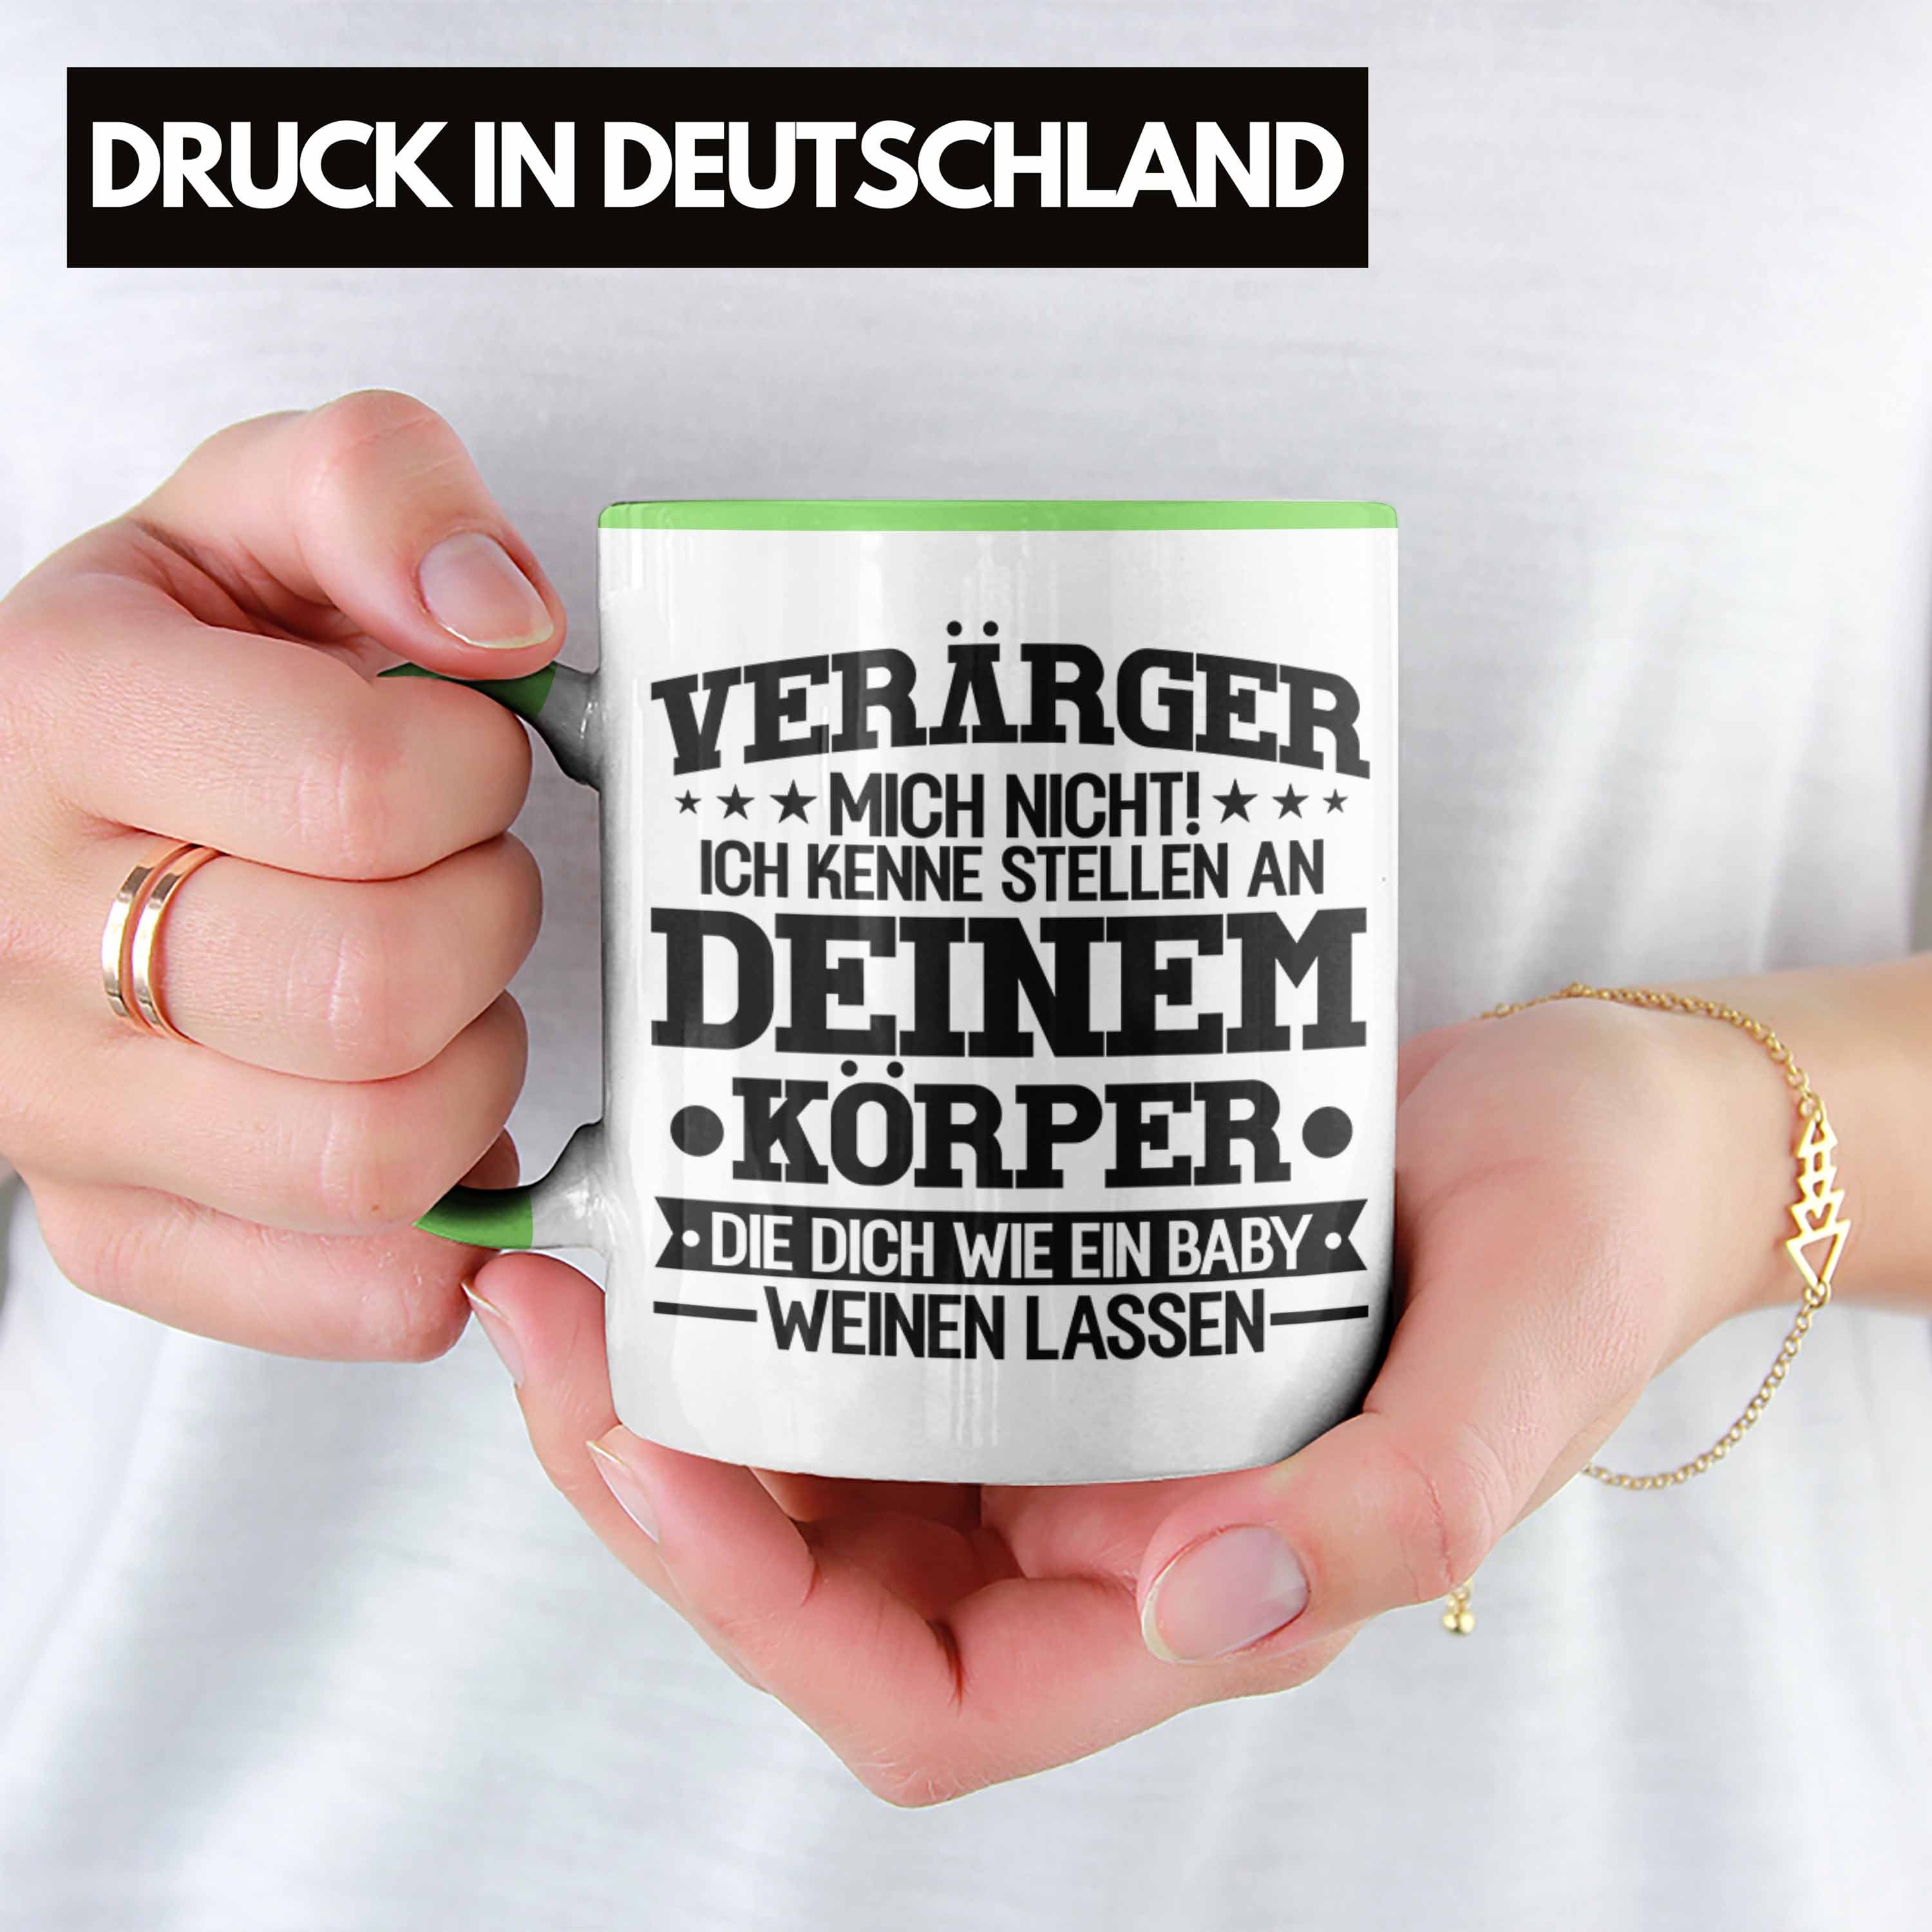 Praxis Trendation Geschenk Physiotherapie Tasse Geschenkidee Grün - Lustiger Trendation Tasse Spruch Physiotherapeut